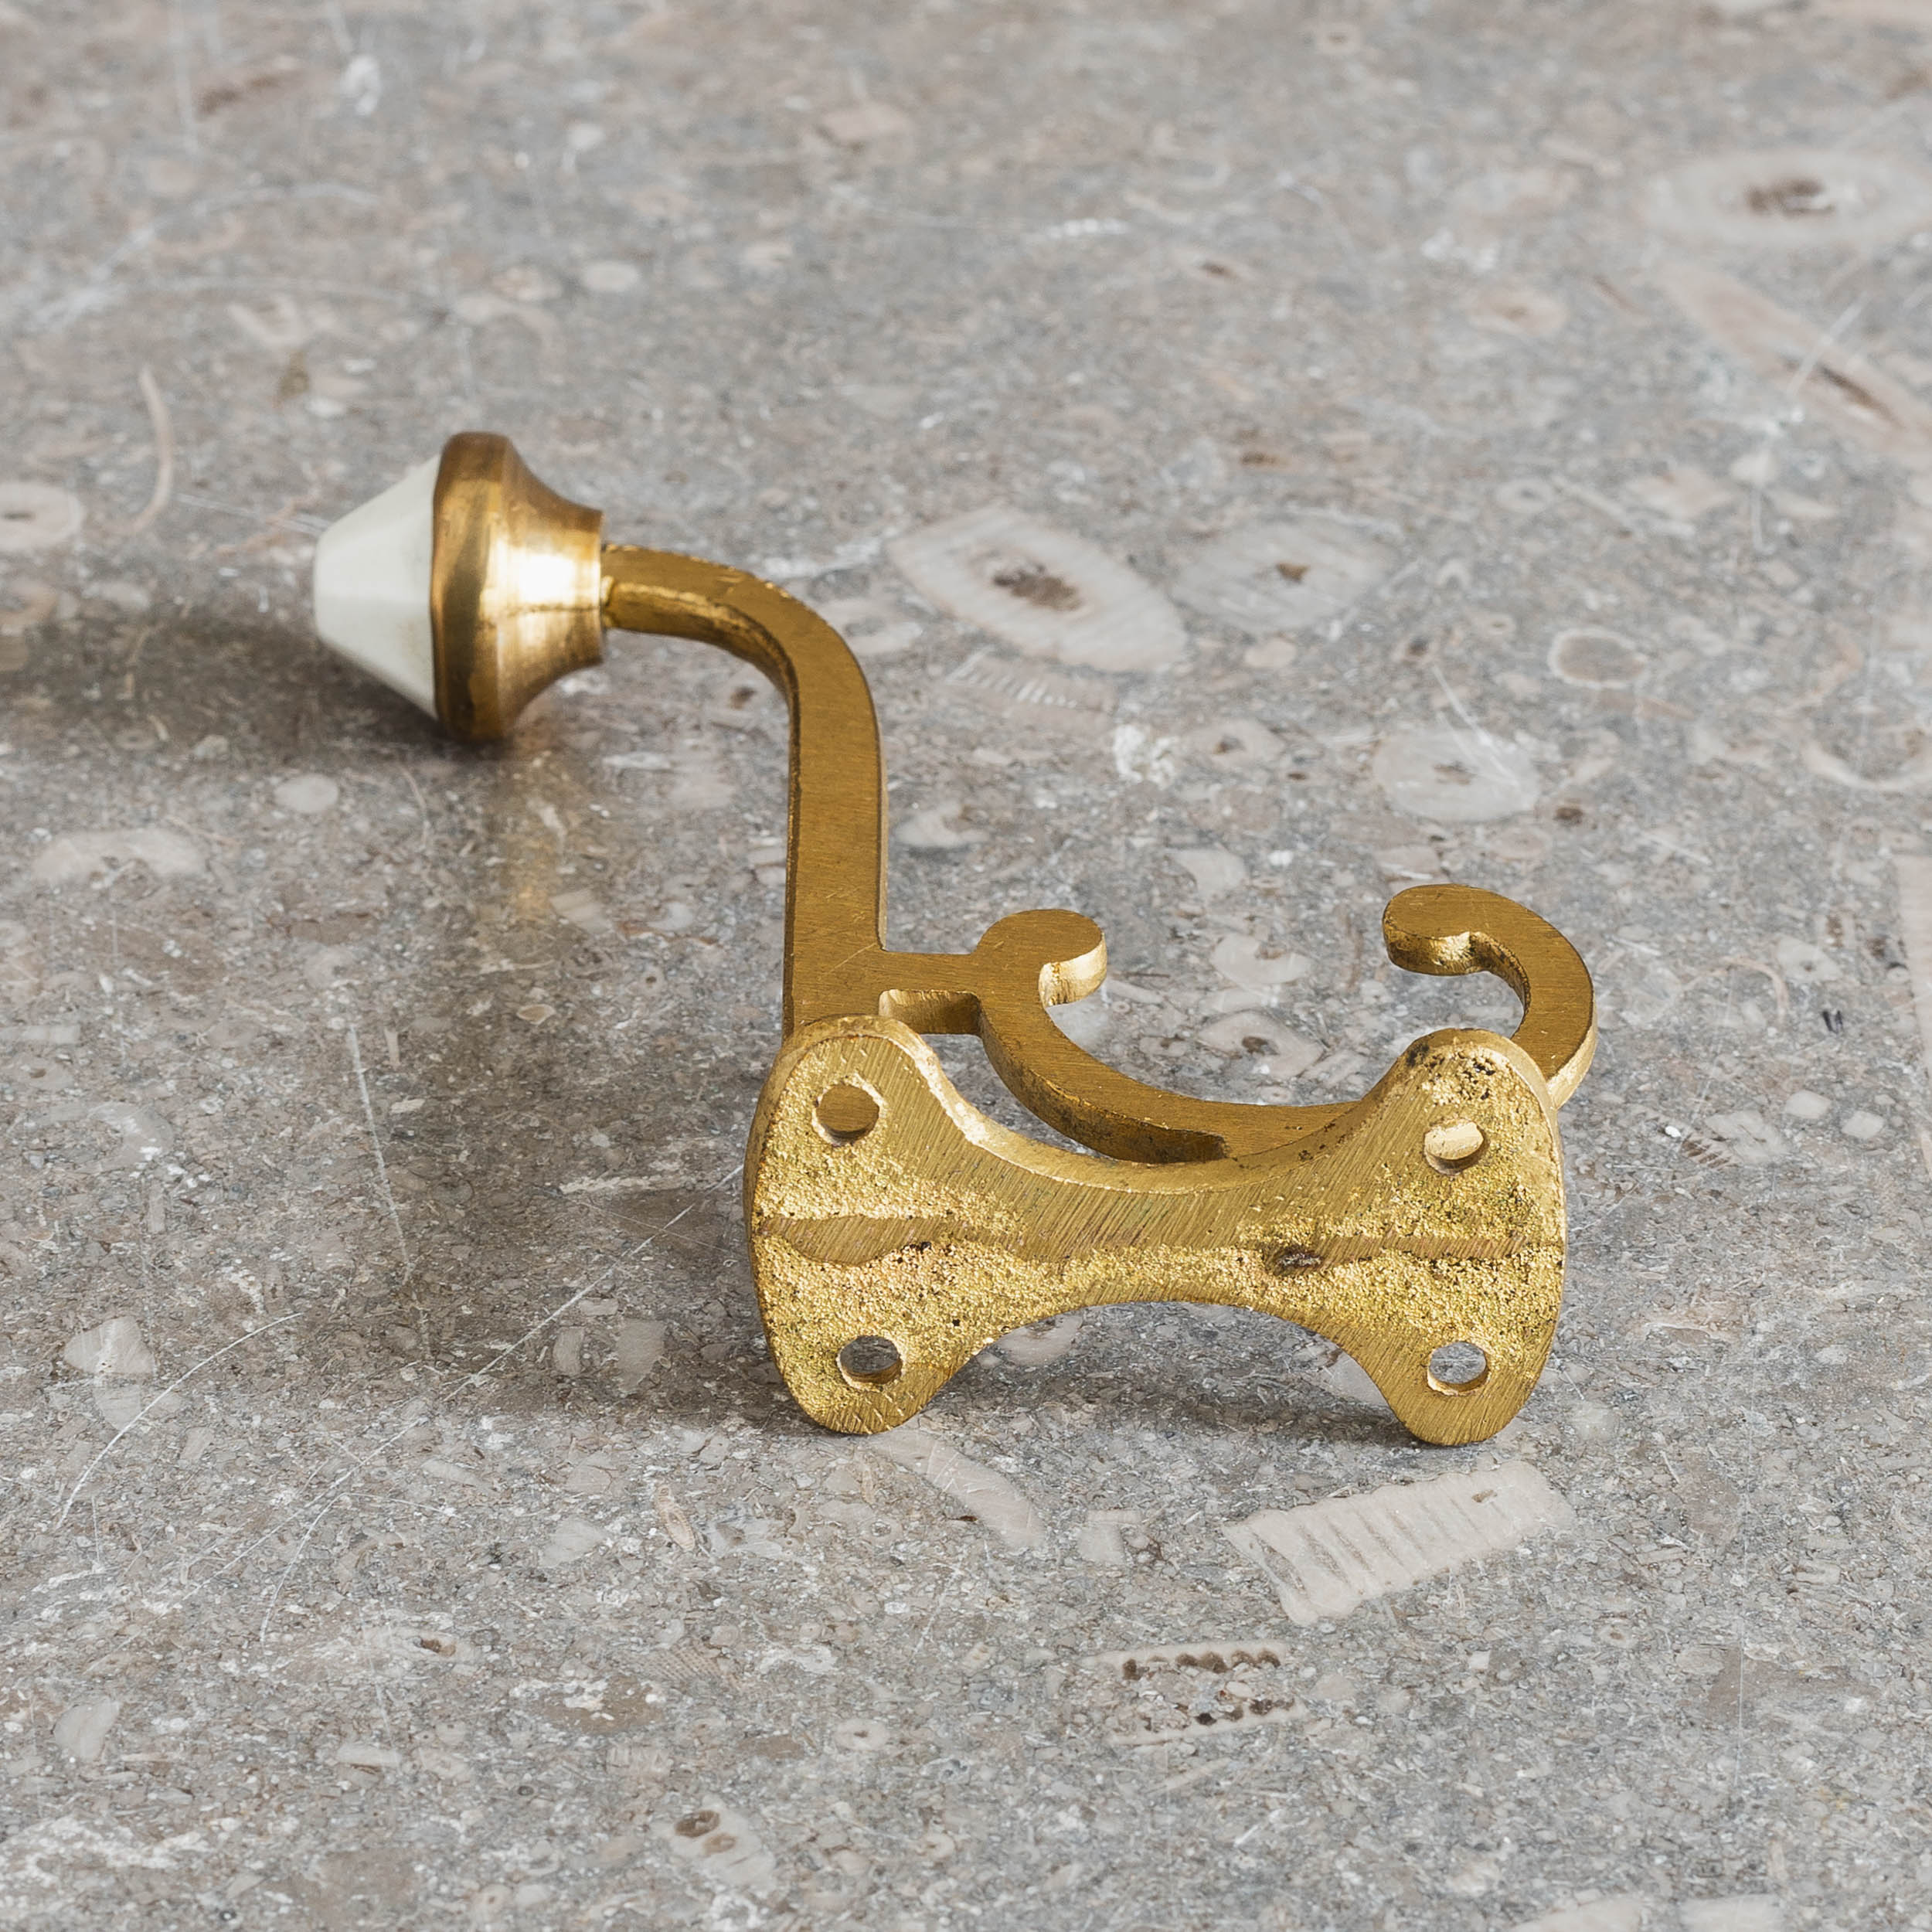 Lacquered brass coat hooks - LASSCO - England's prime resource for